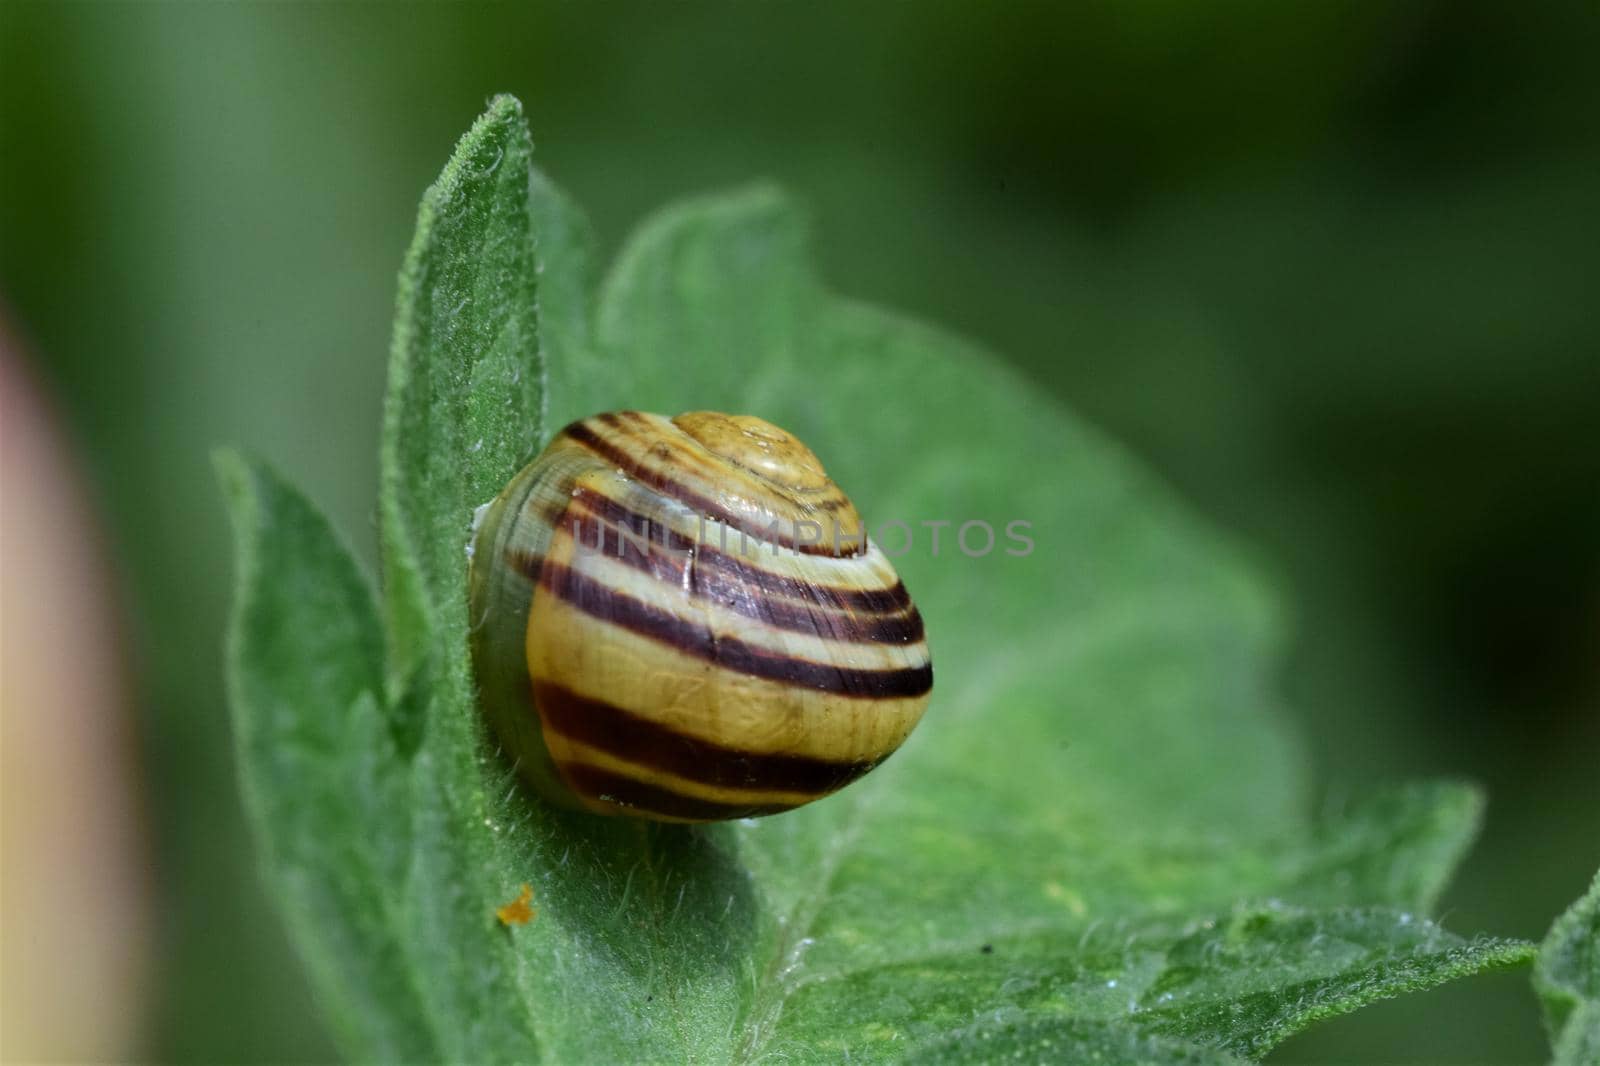 A close up of a Housing snail - Cepaea hortensis on a tomato leaf